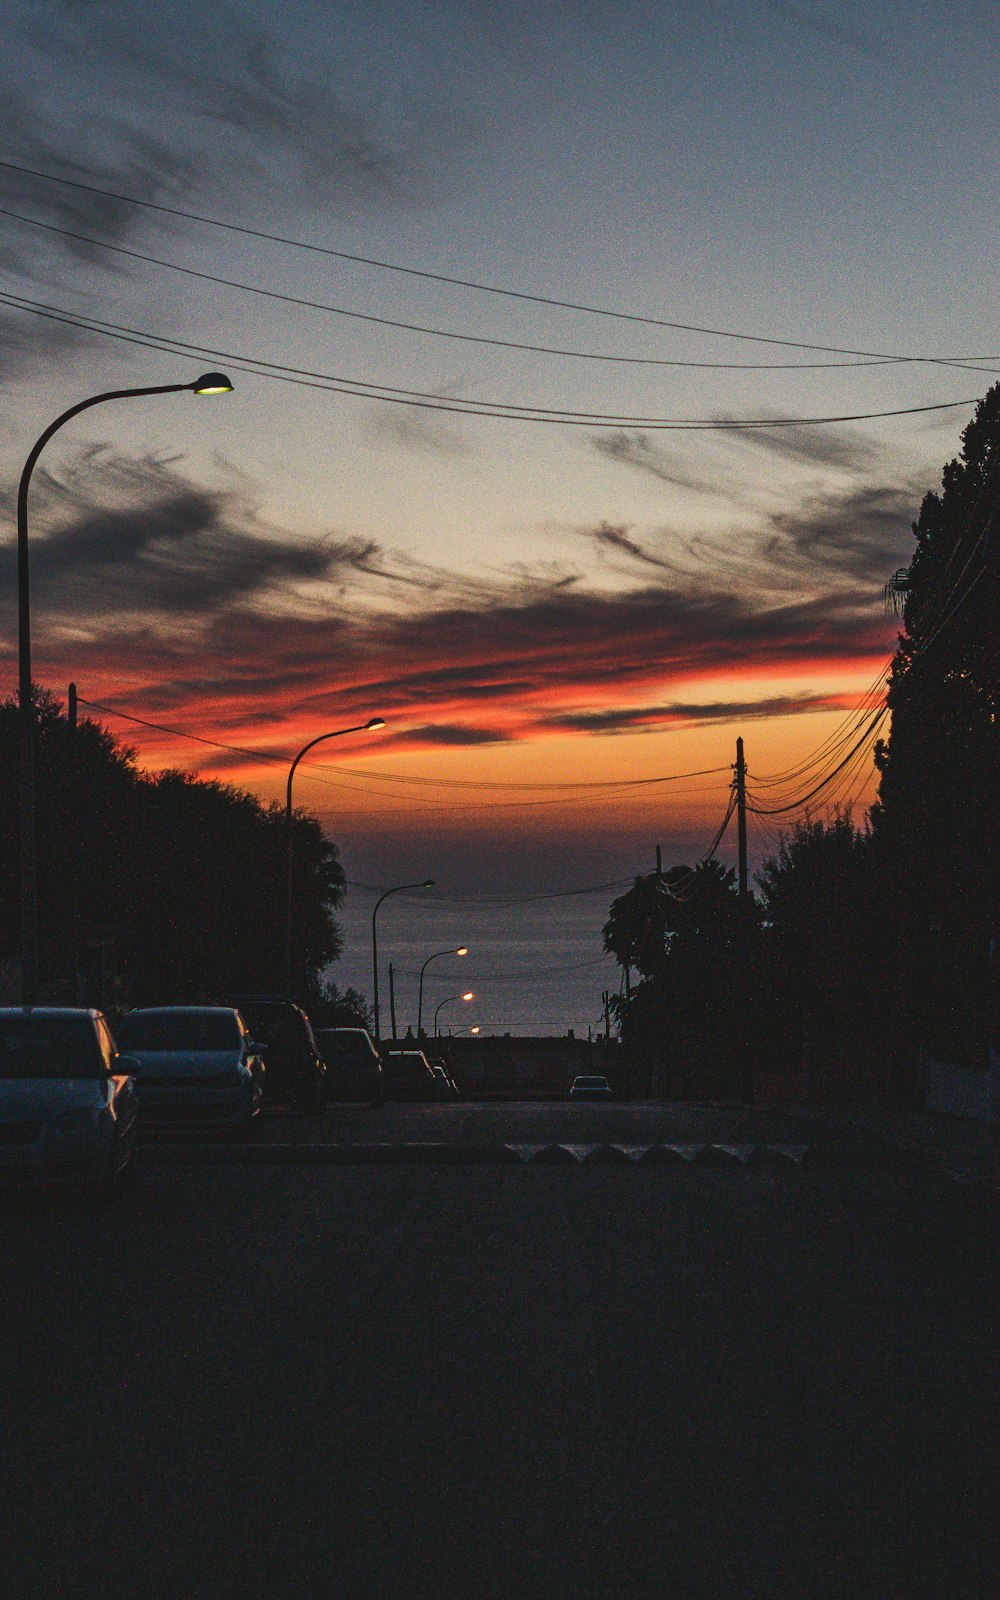 a sunset view of a street with cars parked on the side of the road